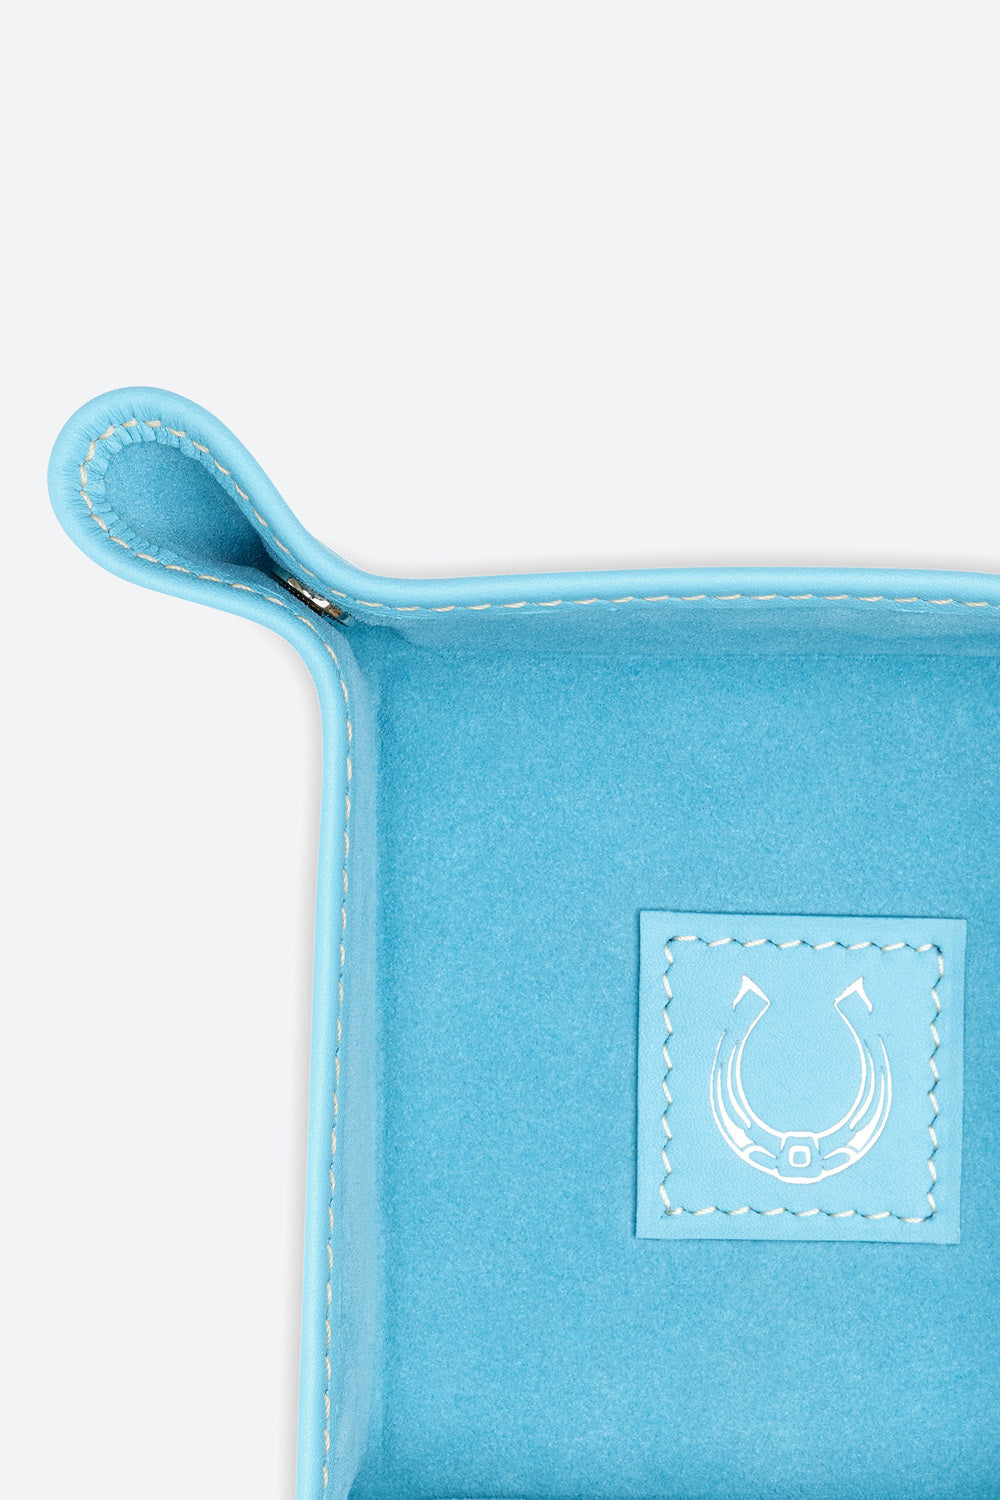 Small Square Leather Valet Tray in Light Blue